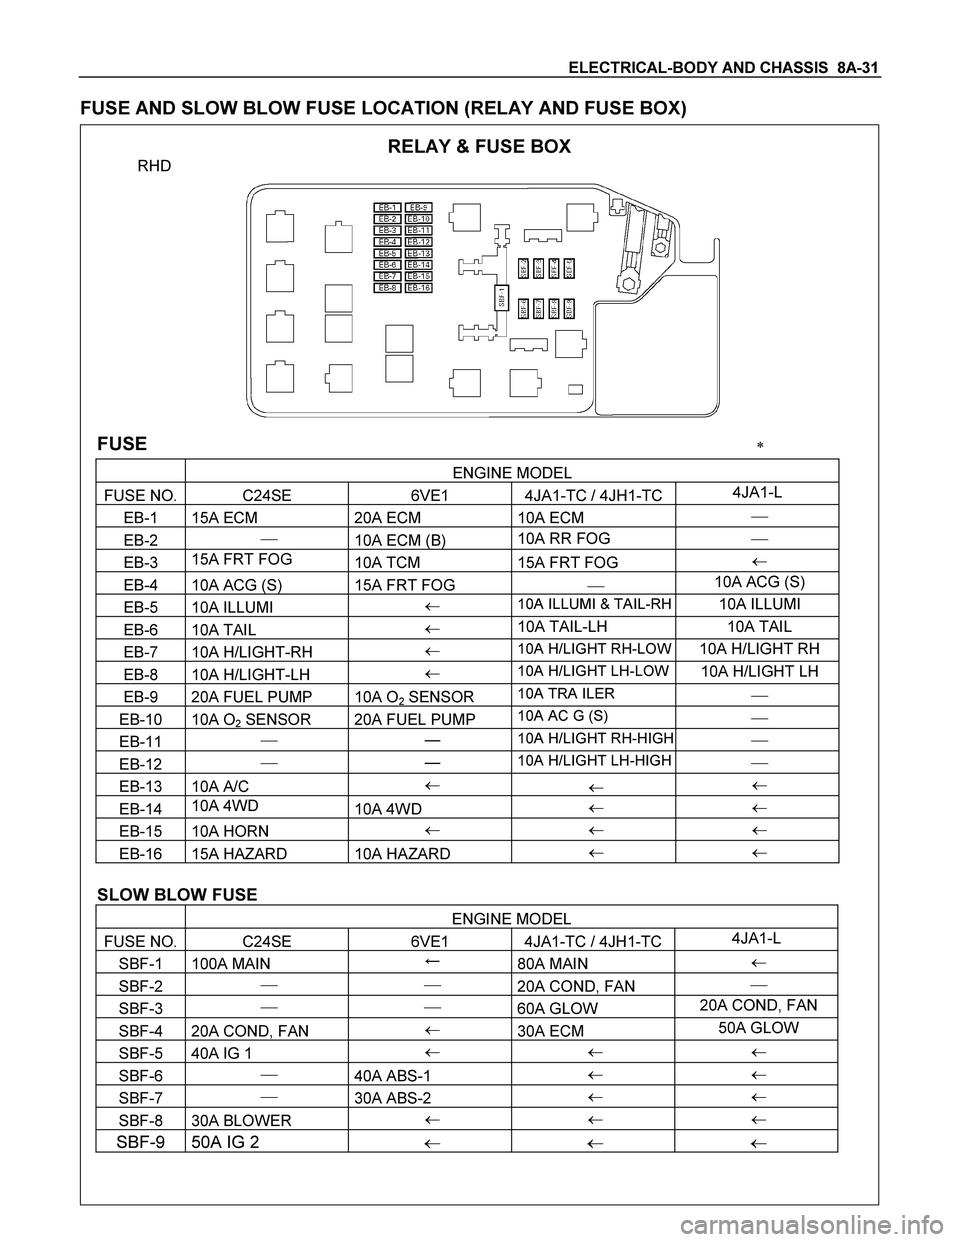 ISUZU TF SERIES 2004  Workshop Manual ELECTRICAL-BODY AND CHASSIS  8A-31 
FUSE AND SLOW BLOW FUSE LOCATION (RELAY AND FUSE BOX) 
 RELAY & FUSE BOX 
RHD 
 
FUSE  
 ENGINE MODEL 
FUSE NO.  C24SE  6VE1  4JA1-TC / 4JH1-TC4JA1-L 
EB-1  15A EC